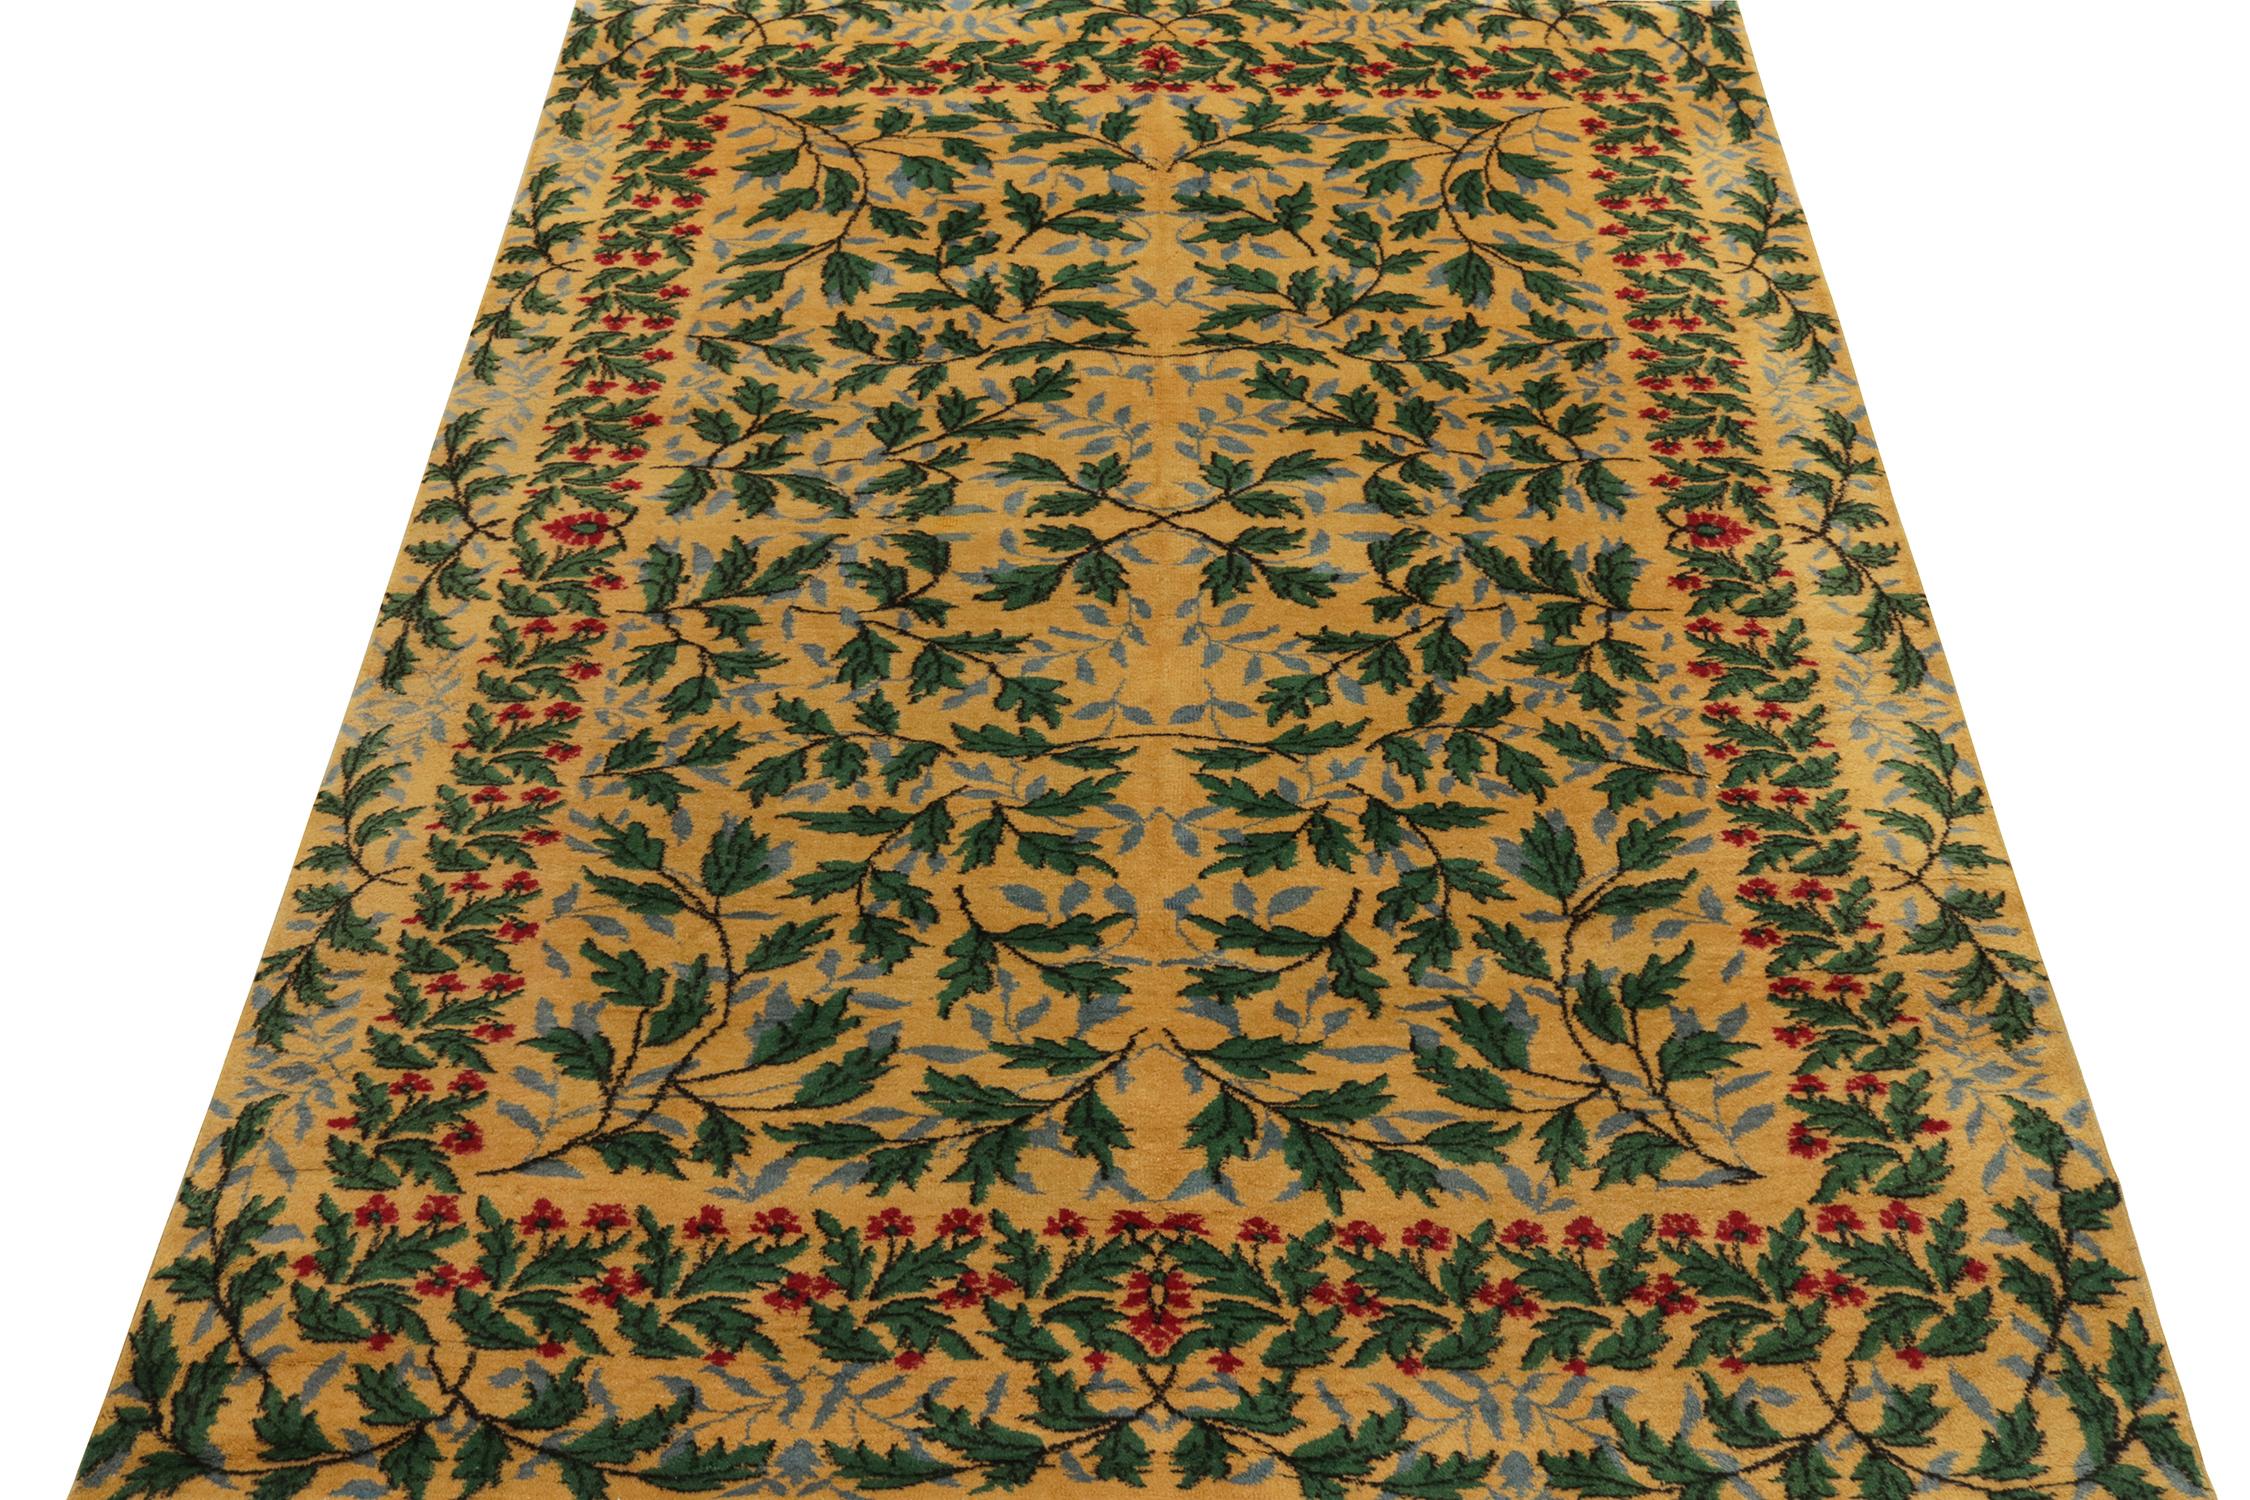 Hailing from Rug & Kilim’s mid-century Pasha collection, a 1960s piece celebrating the works of a bold Turkish designer. This 7x10 rug carries a sprawling foliage pattern in deep green, light blue with scarlet red punctuations on a gold